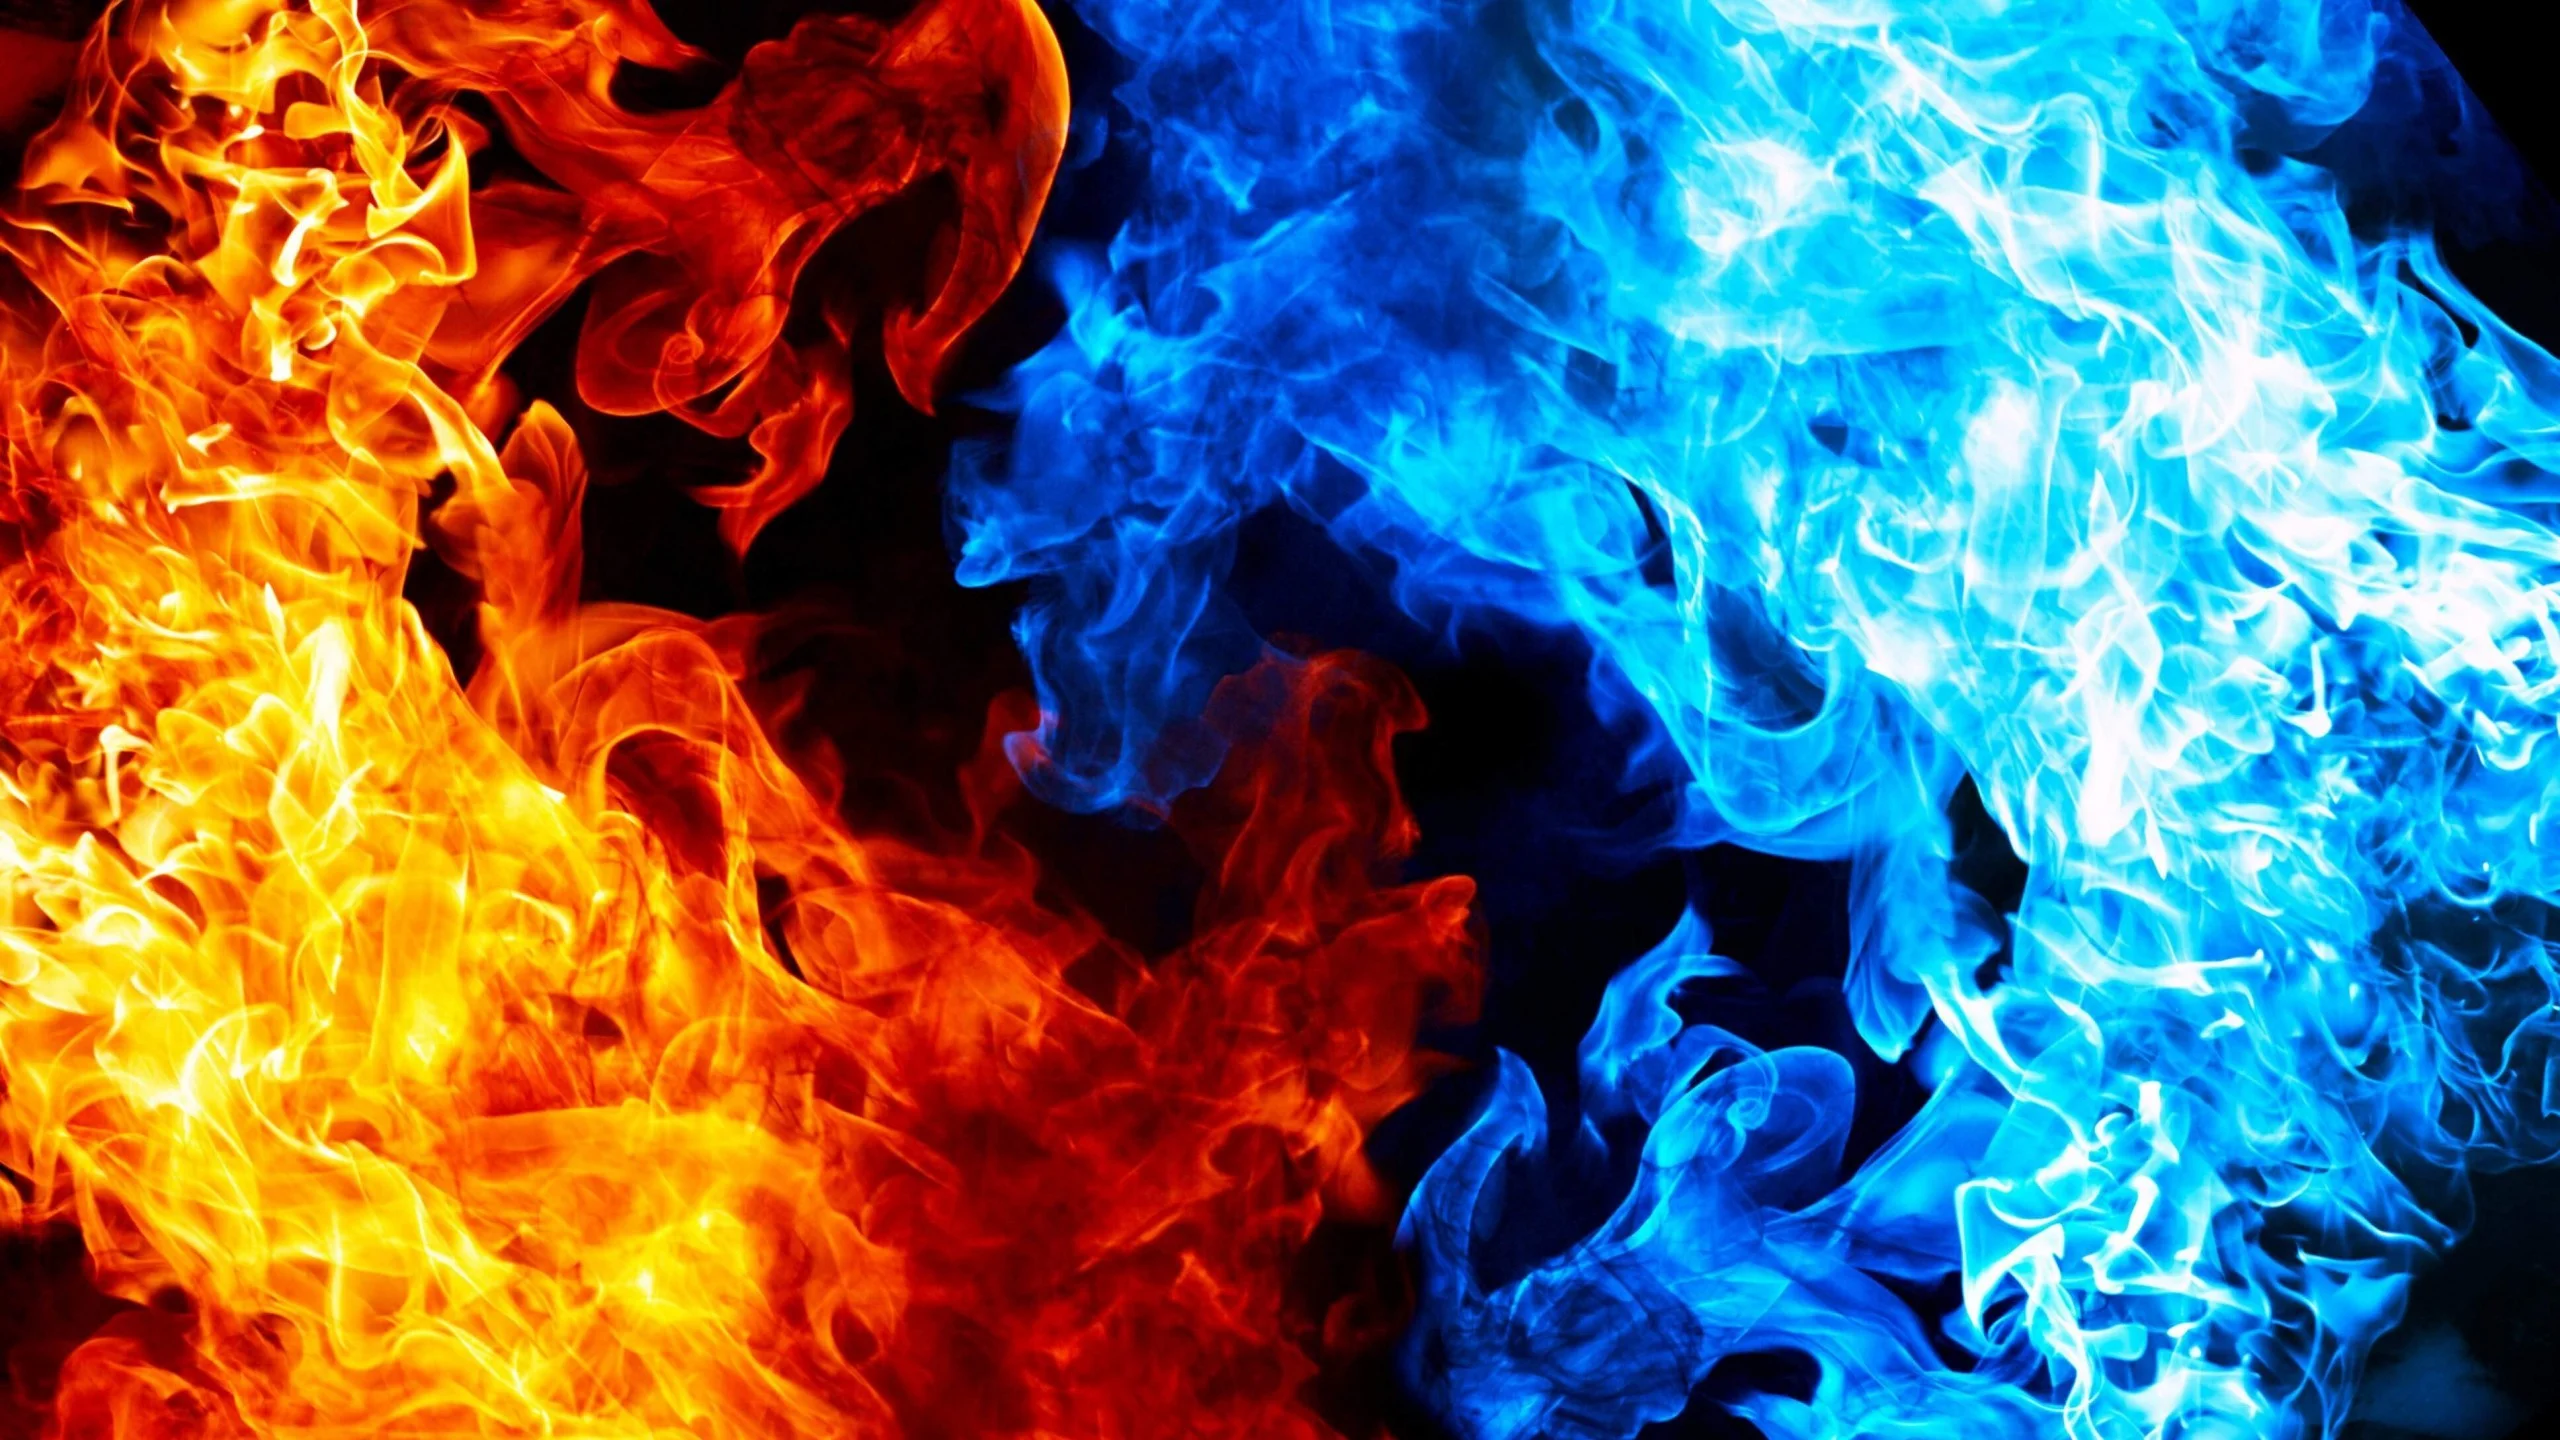 Blue And Red Fire Wallpaper for Desktop 2560 x 1440